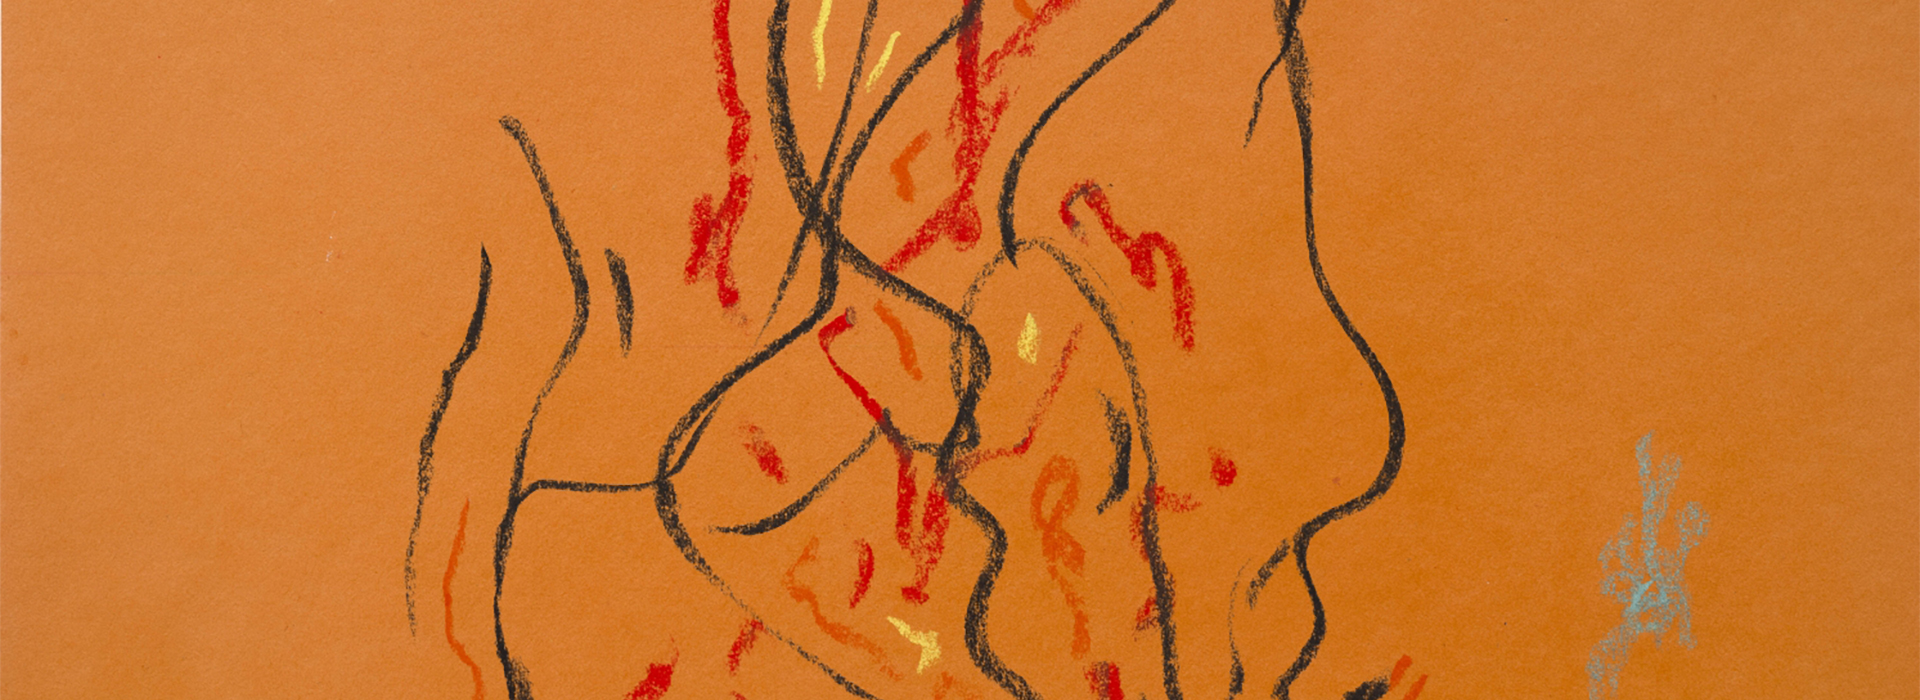 Black, red, yellow, and green lines and squiggles on a piece of orange construction paper